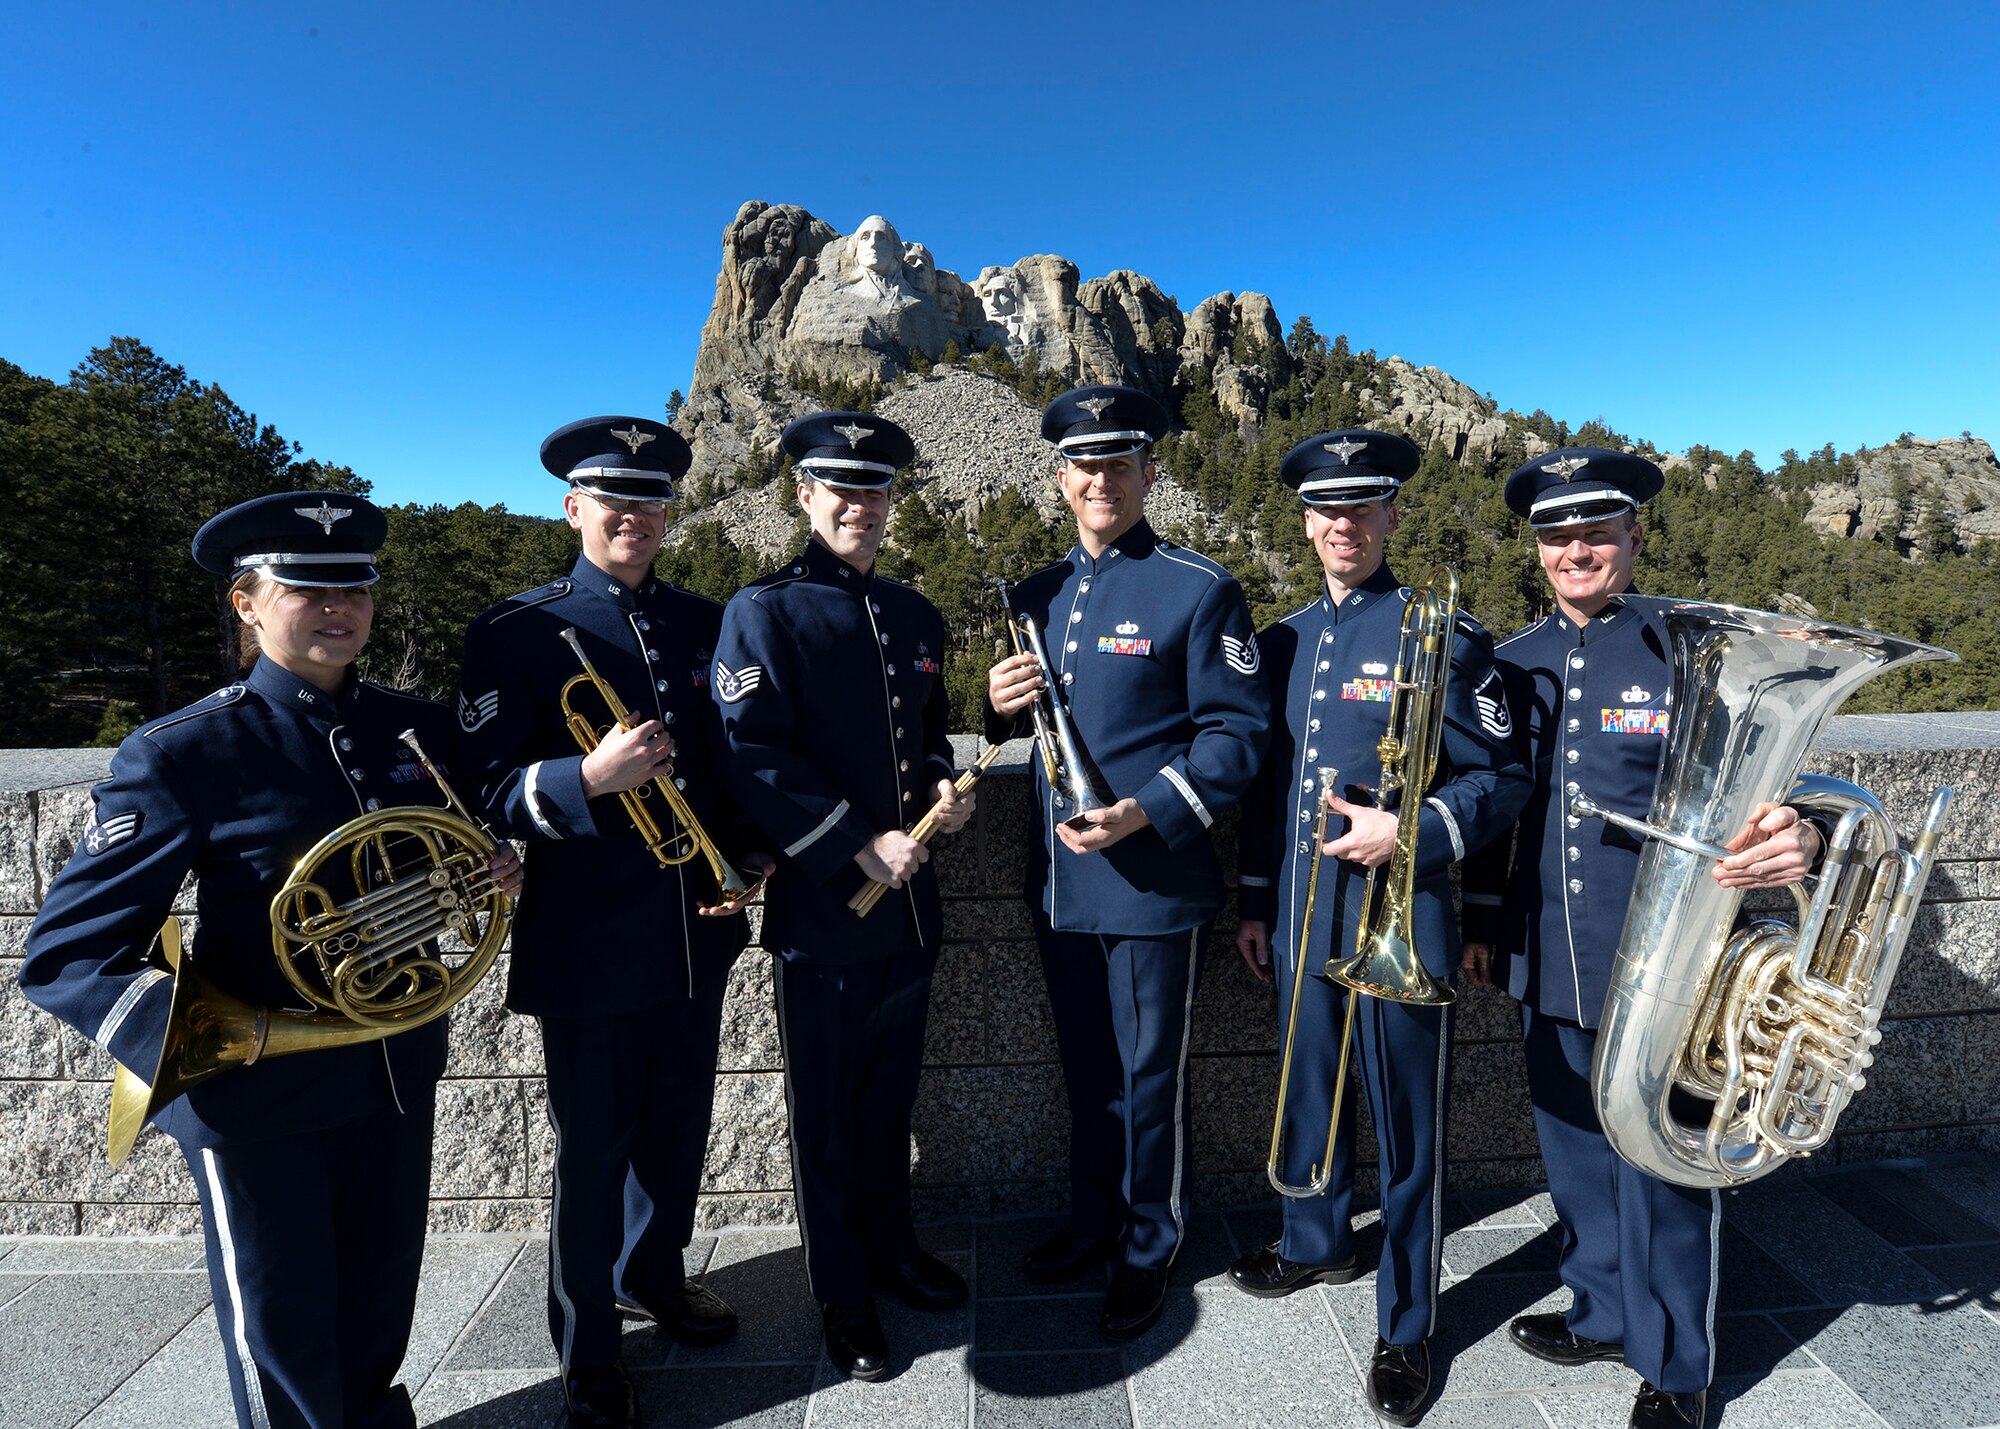 To celebrate President’s Day, Offutt Brass, the brass ensemble of the U.S. Air Force Heartland of America Band, performed at Mount Rushmore, S.D., Feb. 20, 2017. The audience was treated to music of patriotic fervor and had an opportunity to learn about the ensemble’s role within the Air Force. (U.S. Air Force photo by Senior Airman Anania Tekurio)